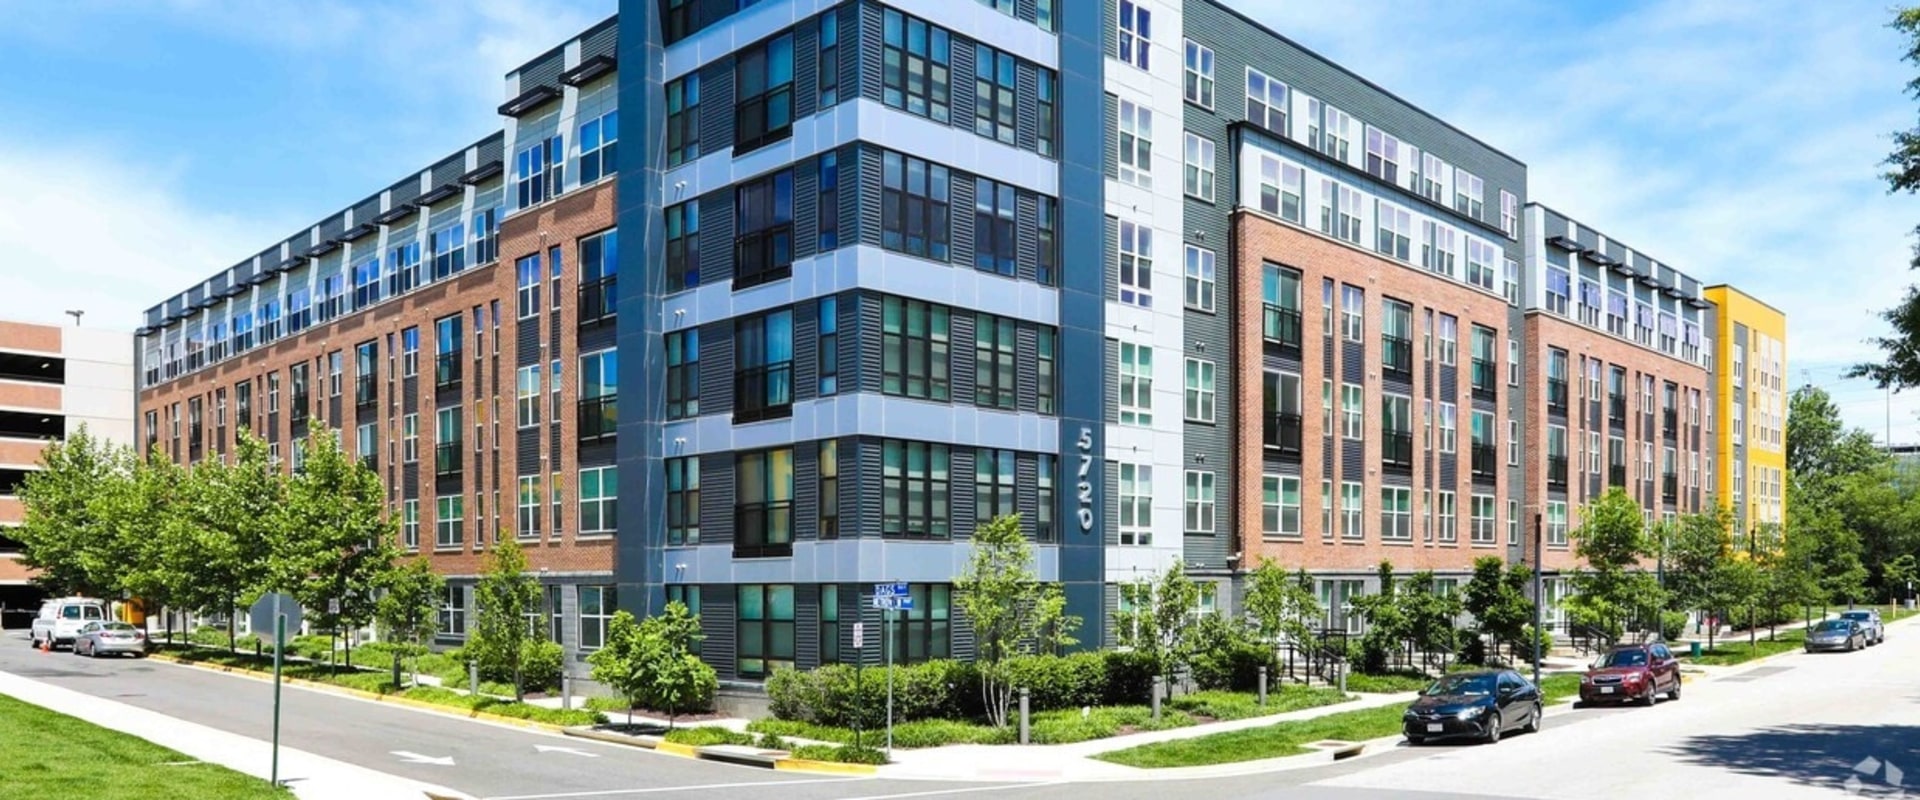 Uncover Affordable Student Housing Options in Alexandria, VA